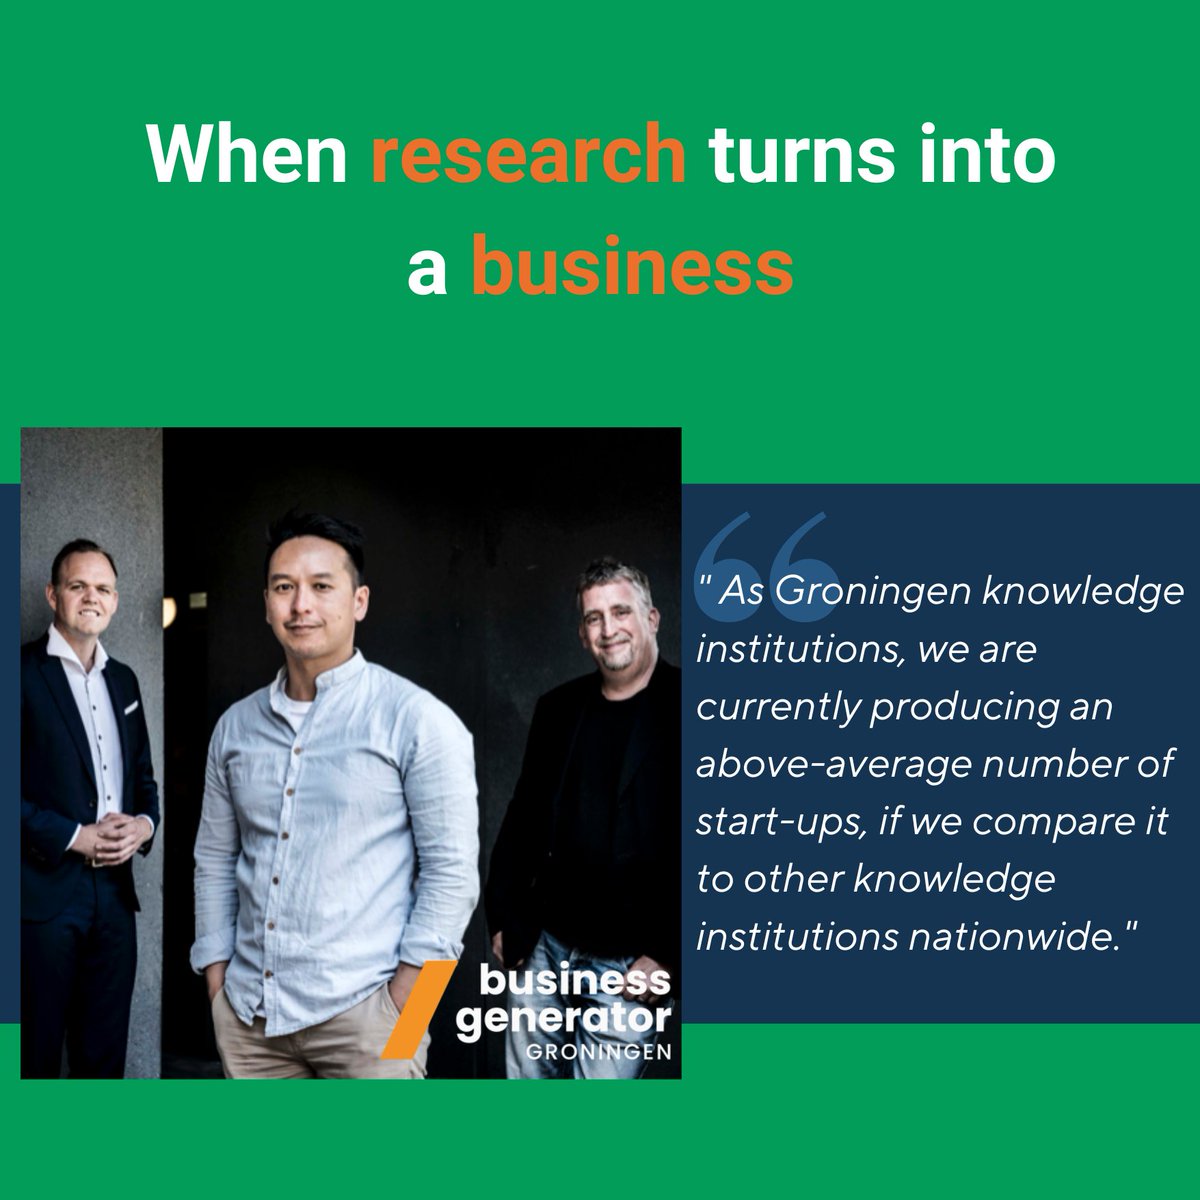 🚀 Calling all researchers! Ready to make a real-world impact? 
Unlock your research potential, turn it into a game-changing start-up with the invaluable support of Stichting Business Generator Groningen. 💡📈#ResearchToMarket
rug.nl/about-ug/lates…